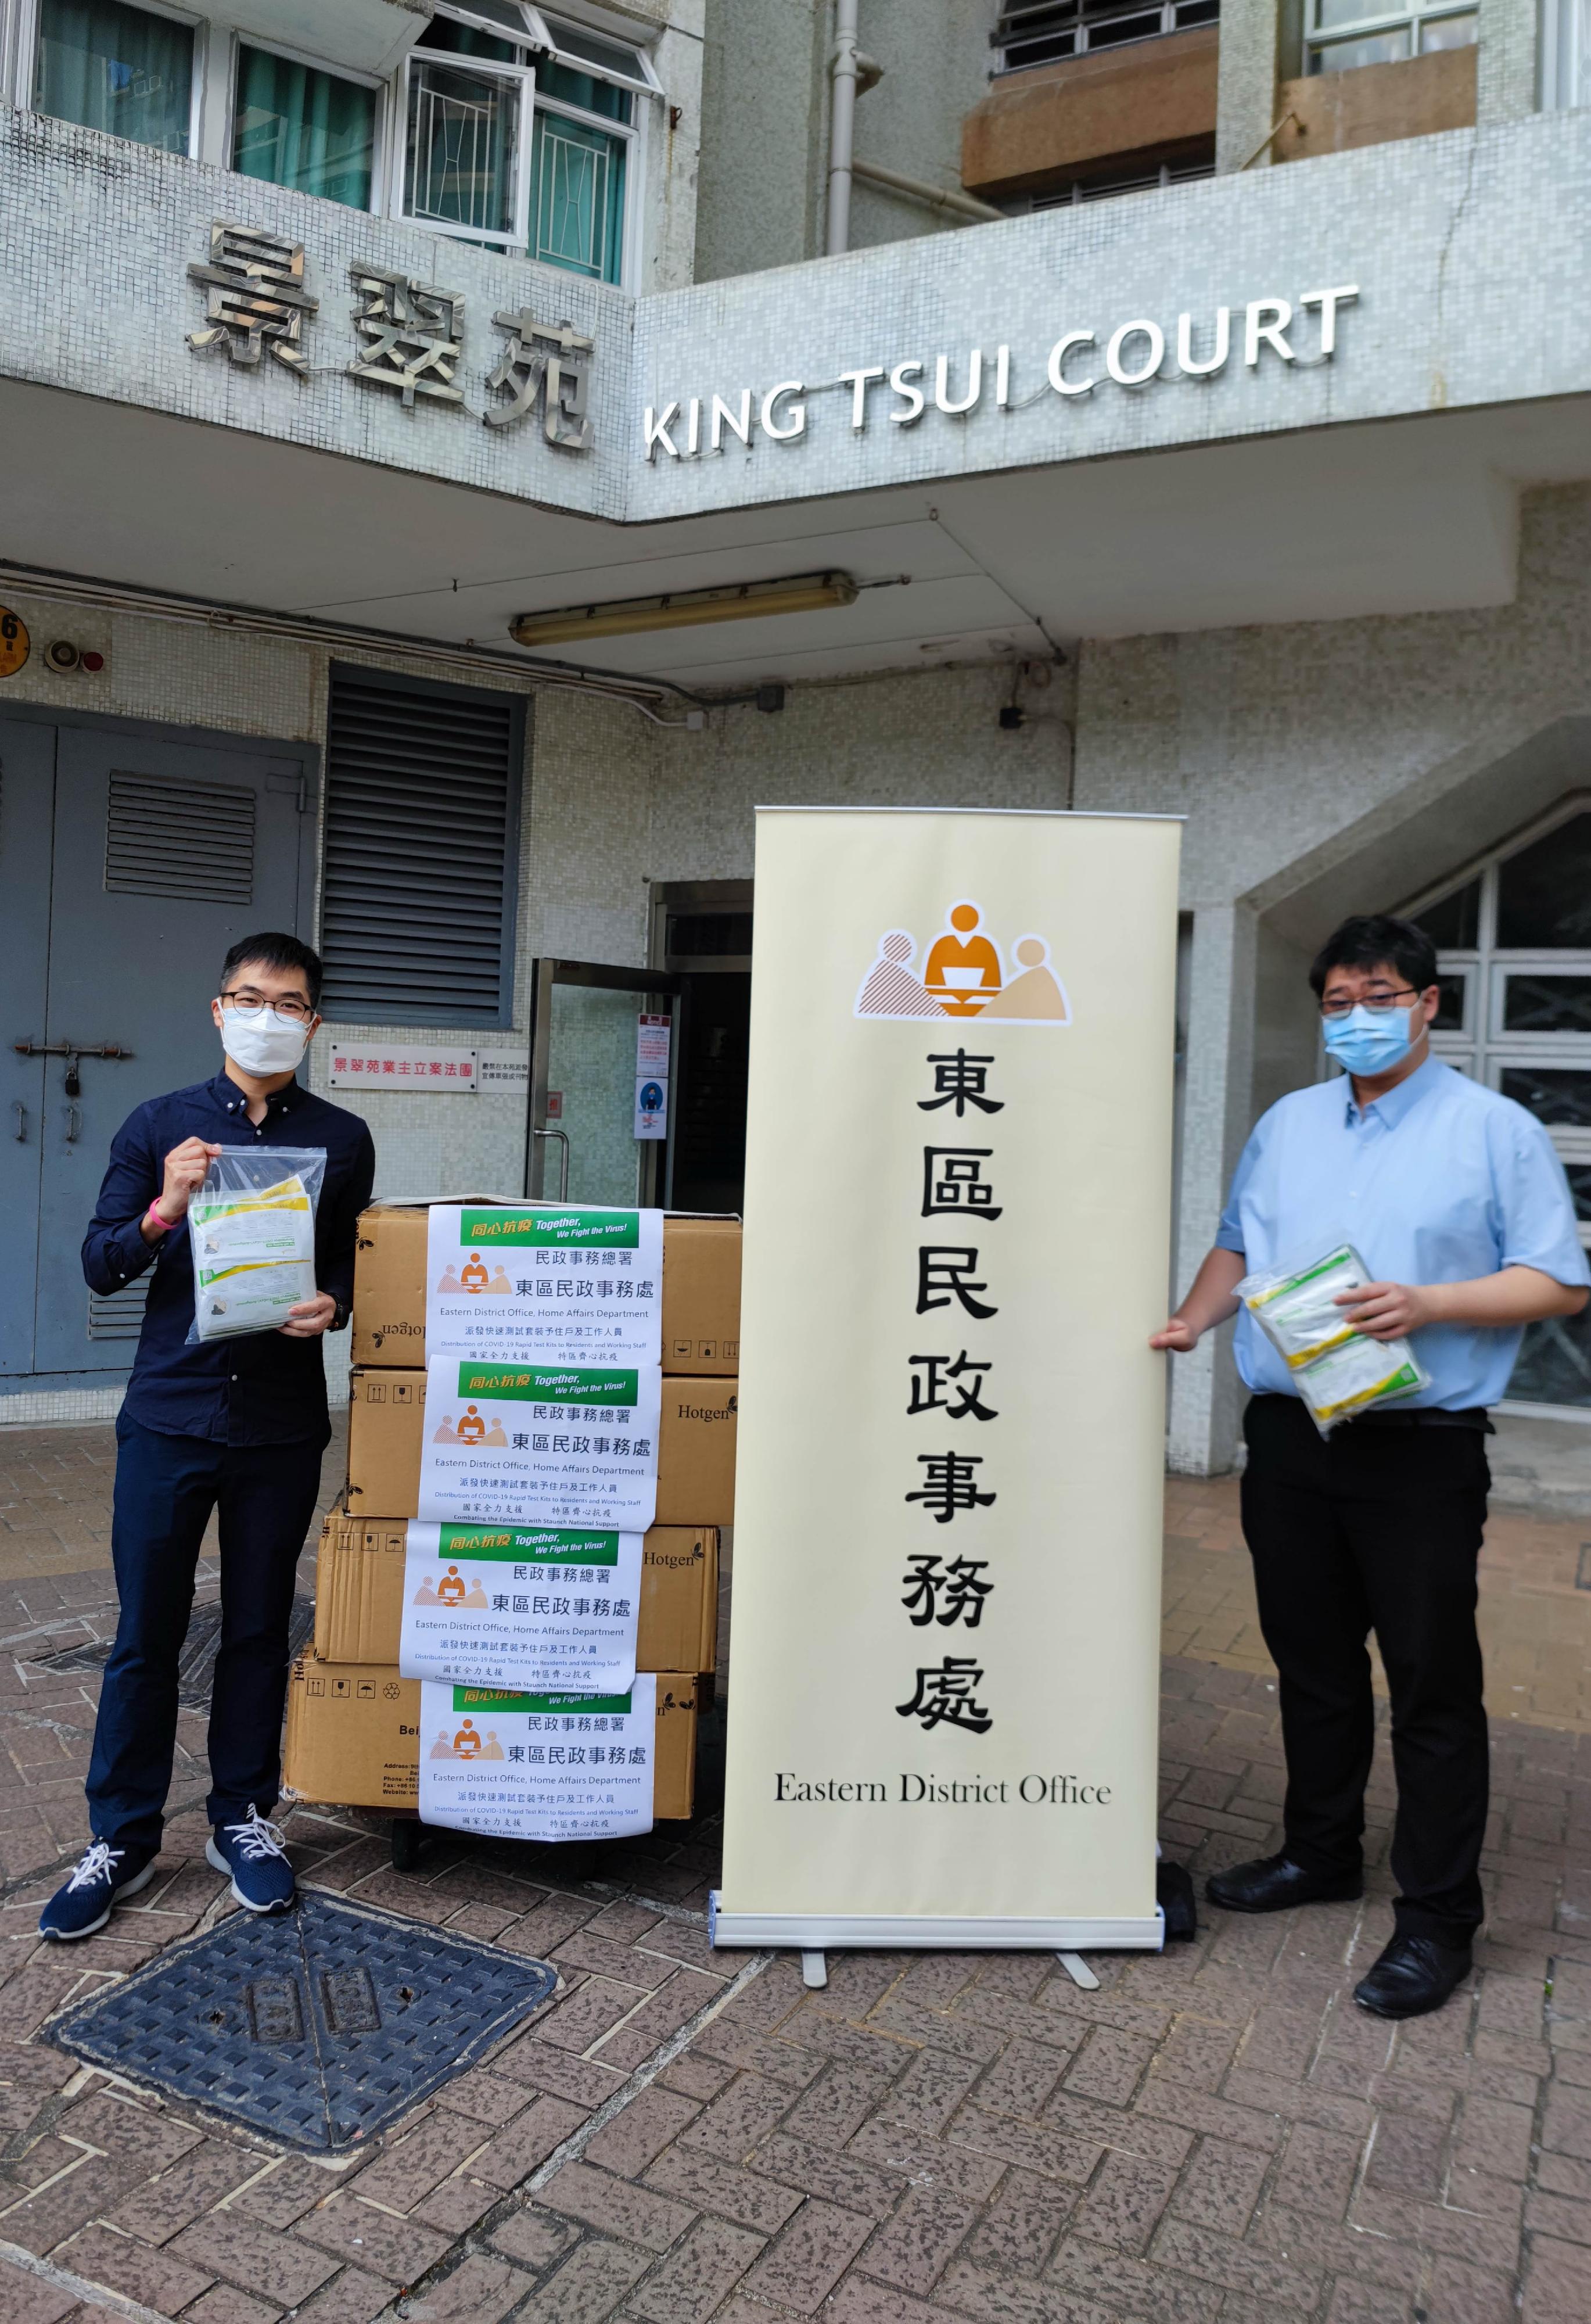 The Eastern District Office distributed COVID-19 rapid test kits to households, cleansing workers and property management staff living and working in King Tsui Court for voluntary testing through the Housing Department and the property management company.
